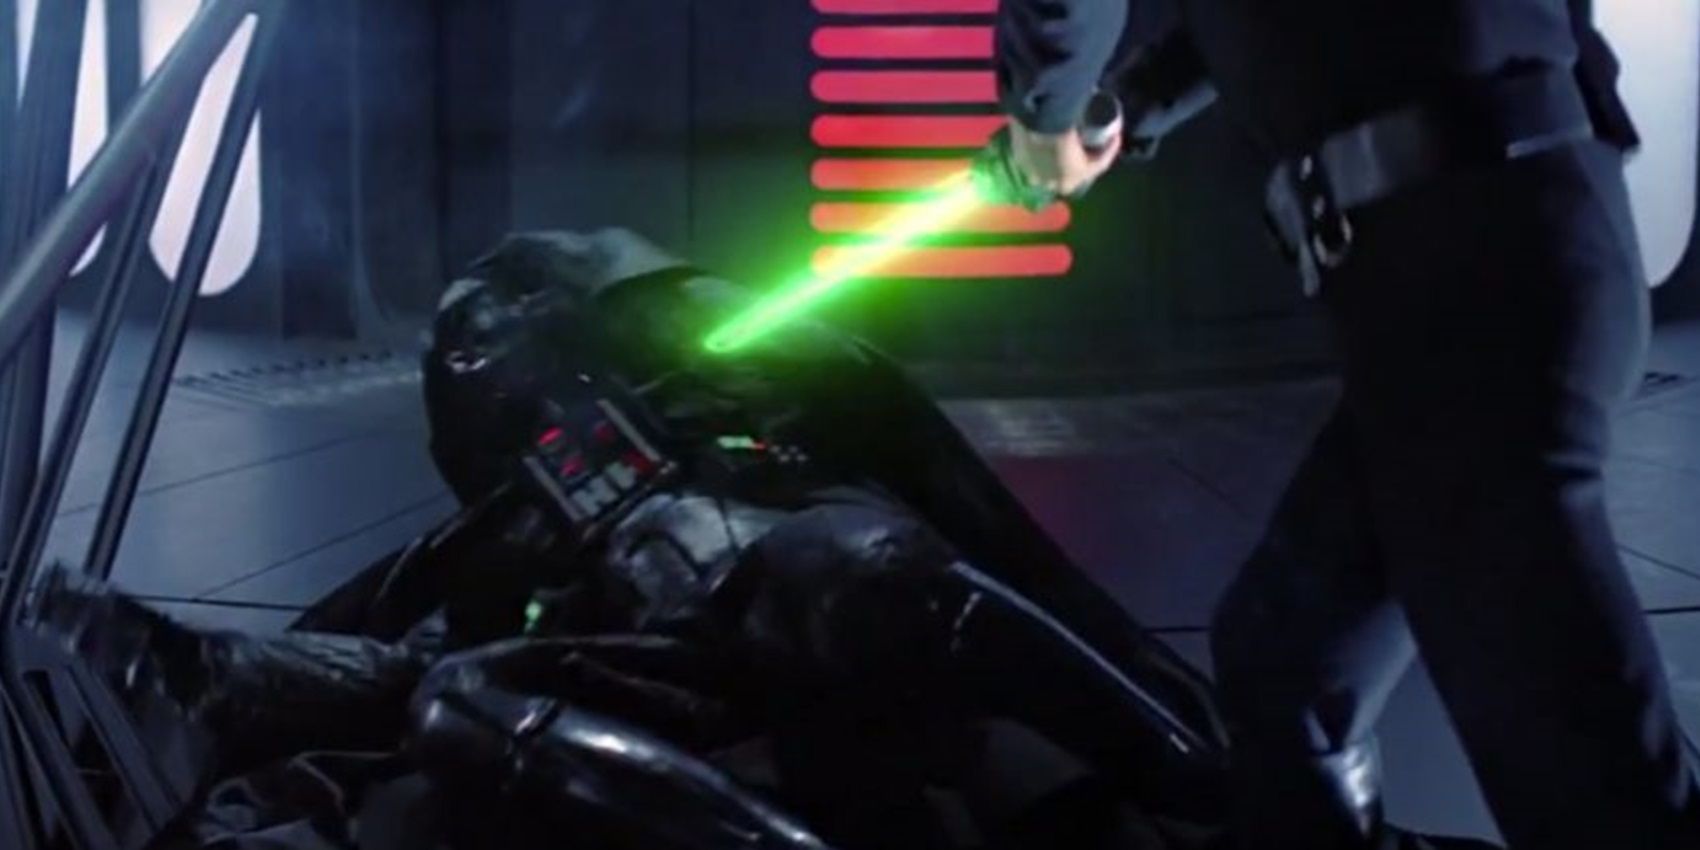 Luke overpowers Vader in Return of the Jedi